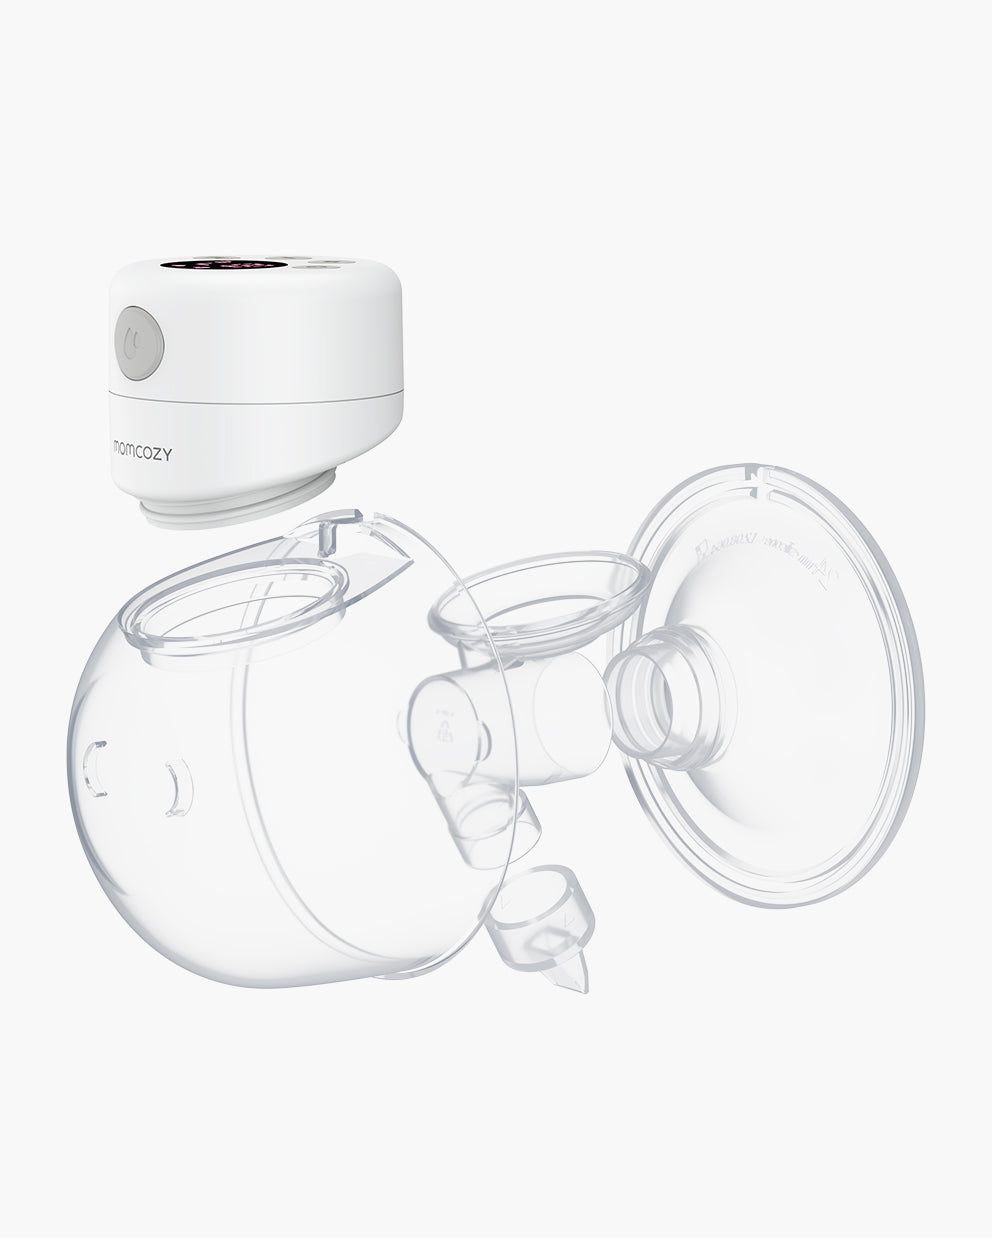 Momcozy S12 Pro Wearable Breast Pump, Double Hands-Free Pump